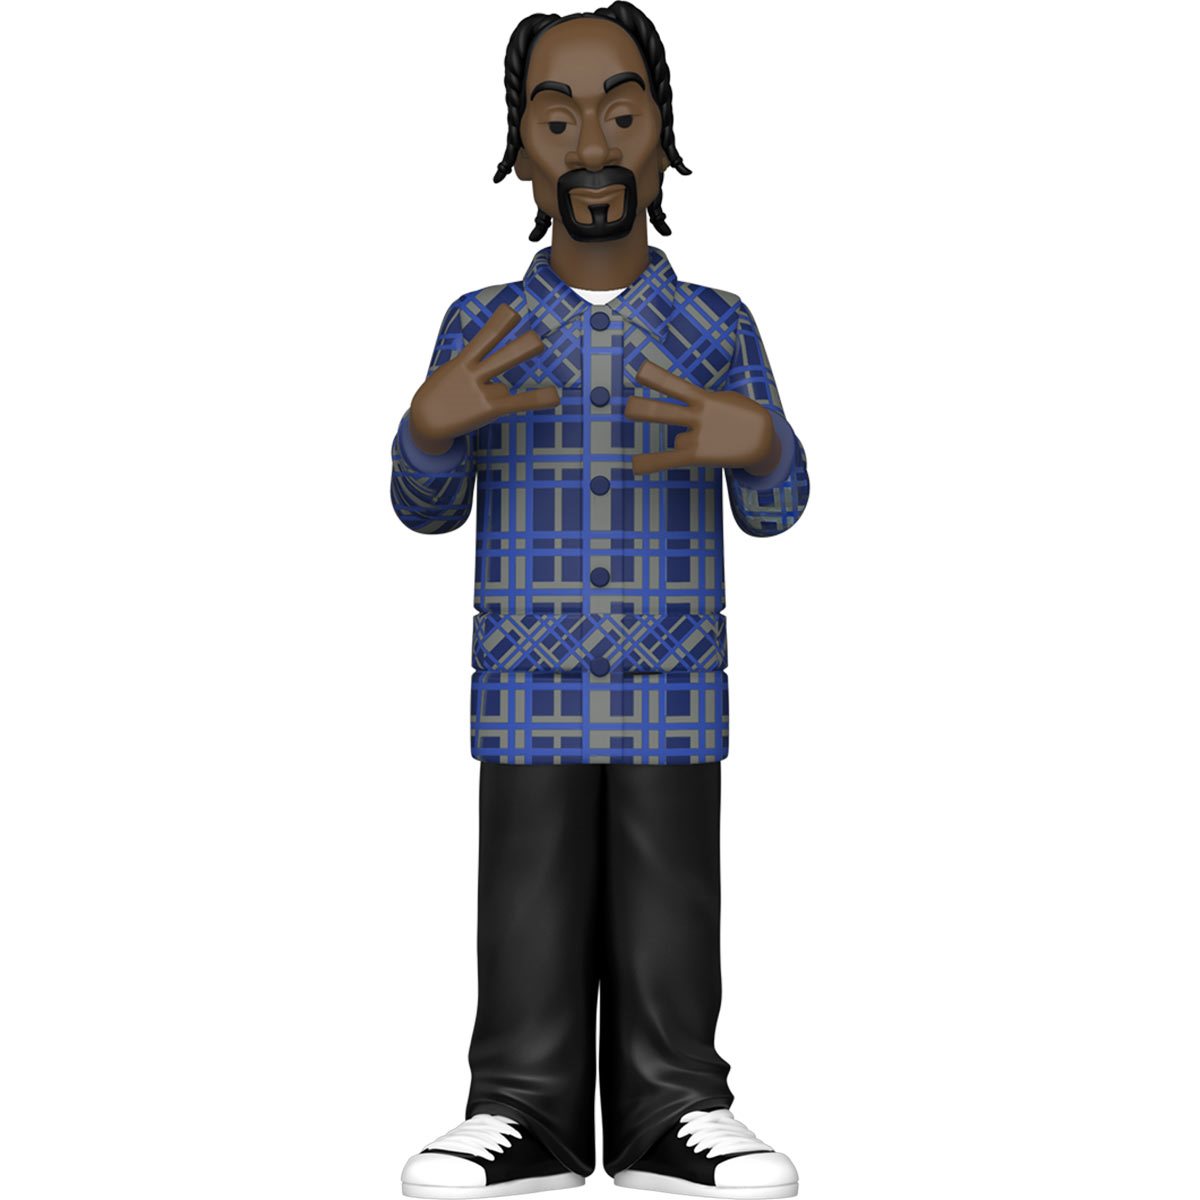 Snoop Dogg 5-Inch Funko Vinyl Gold Figure w/ Chance of chace!